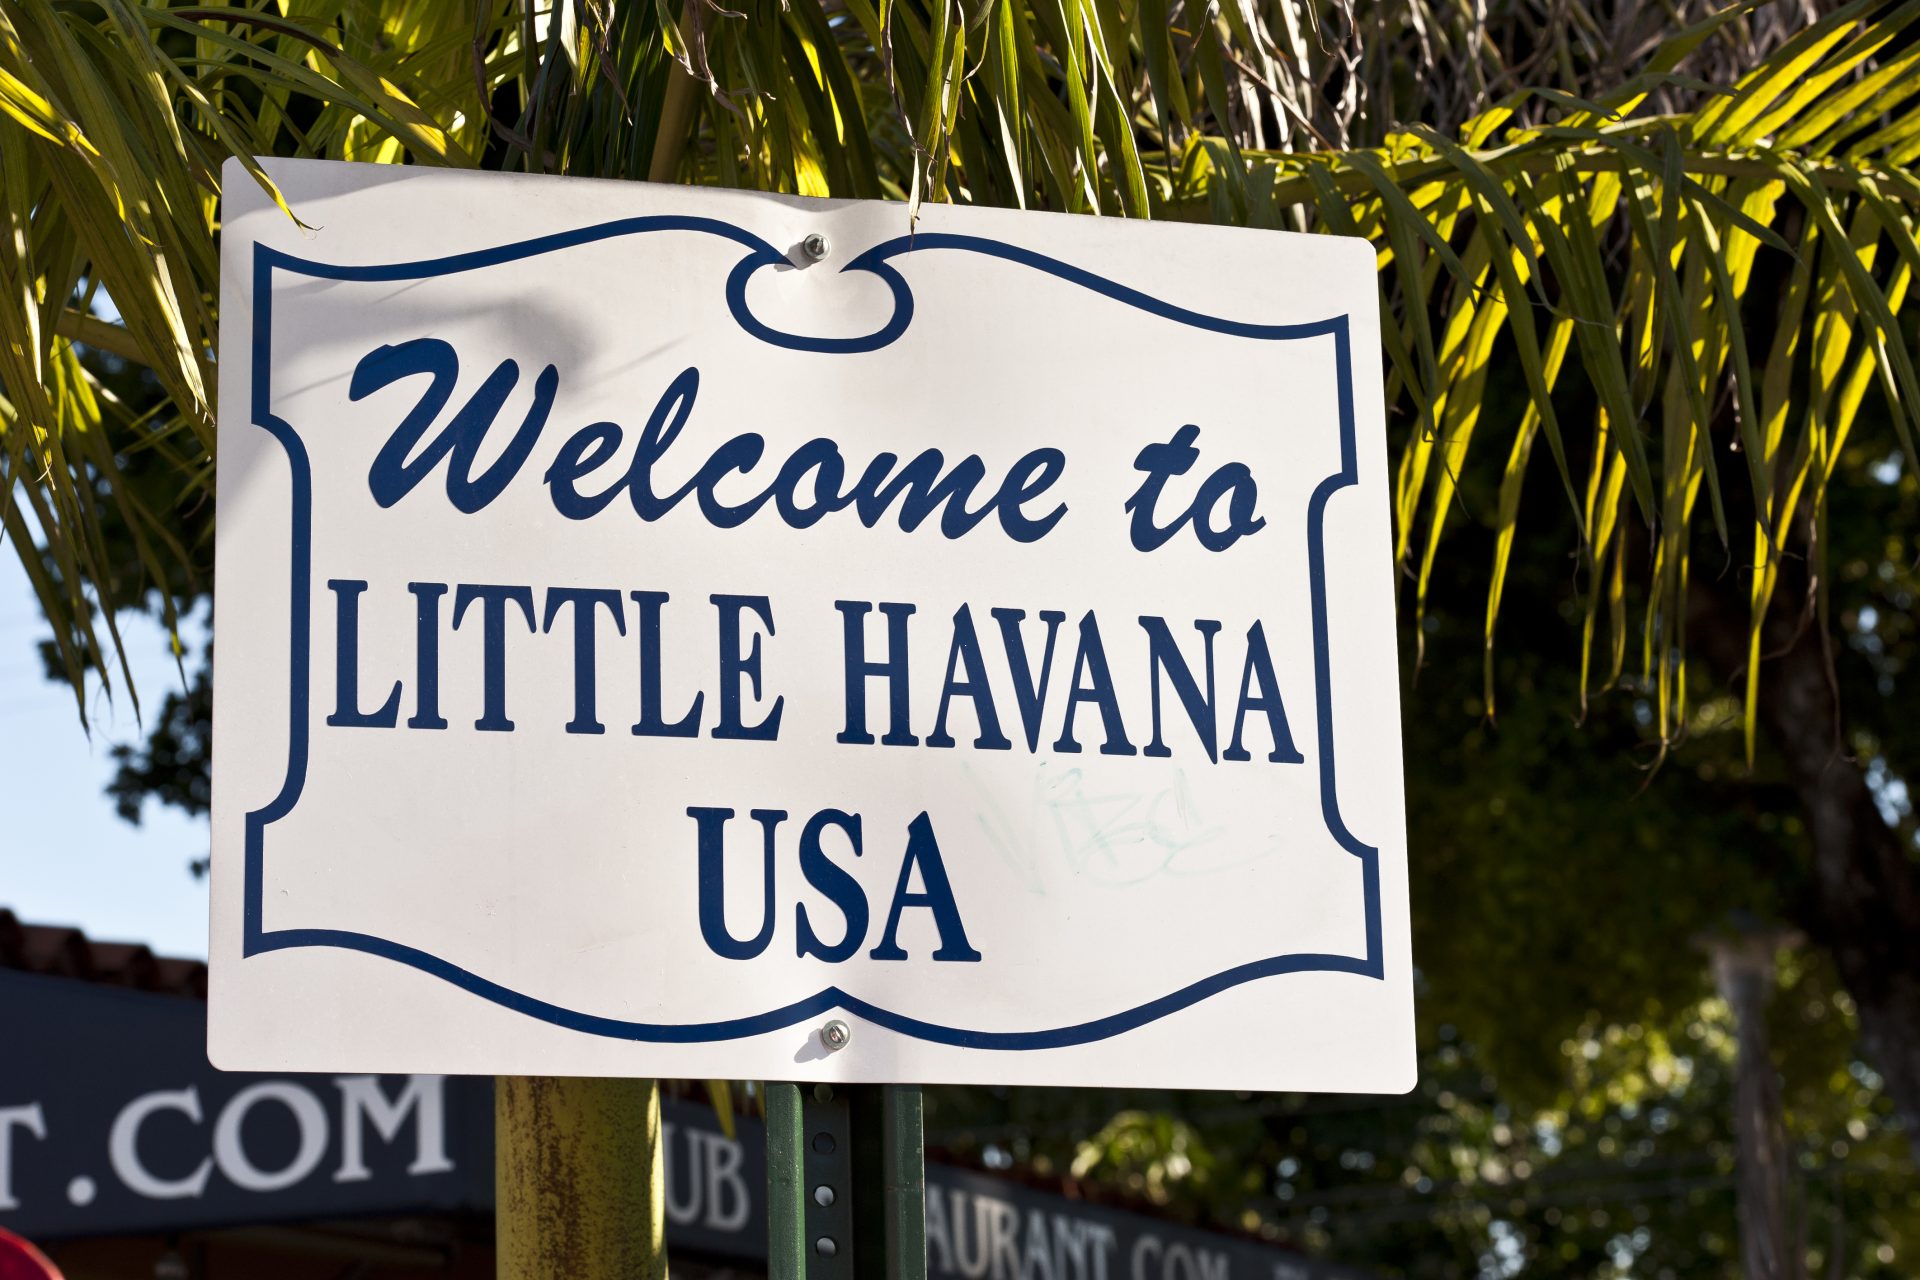 <p>The tastes of Little Havana in Miami are unique: you can enjoy a bit of that Cuban spice without moving from the United States.</p> <p>Image: Unsplash - Tuan Nguyen</p>